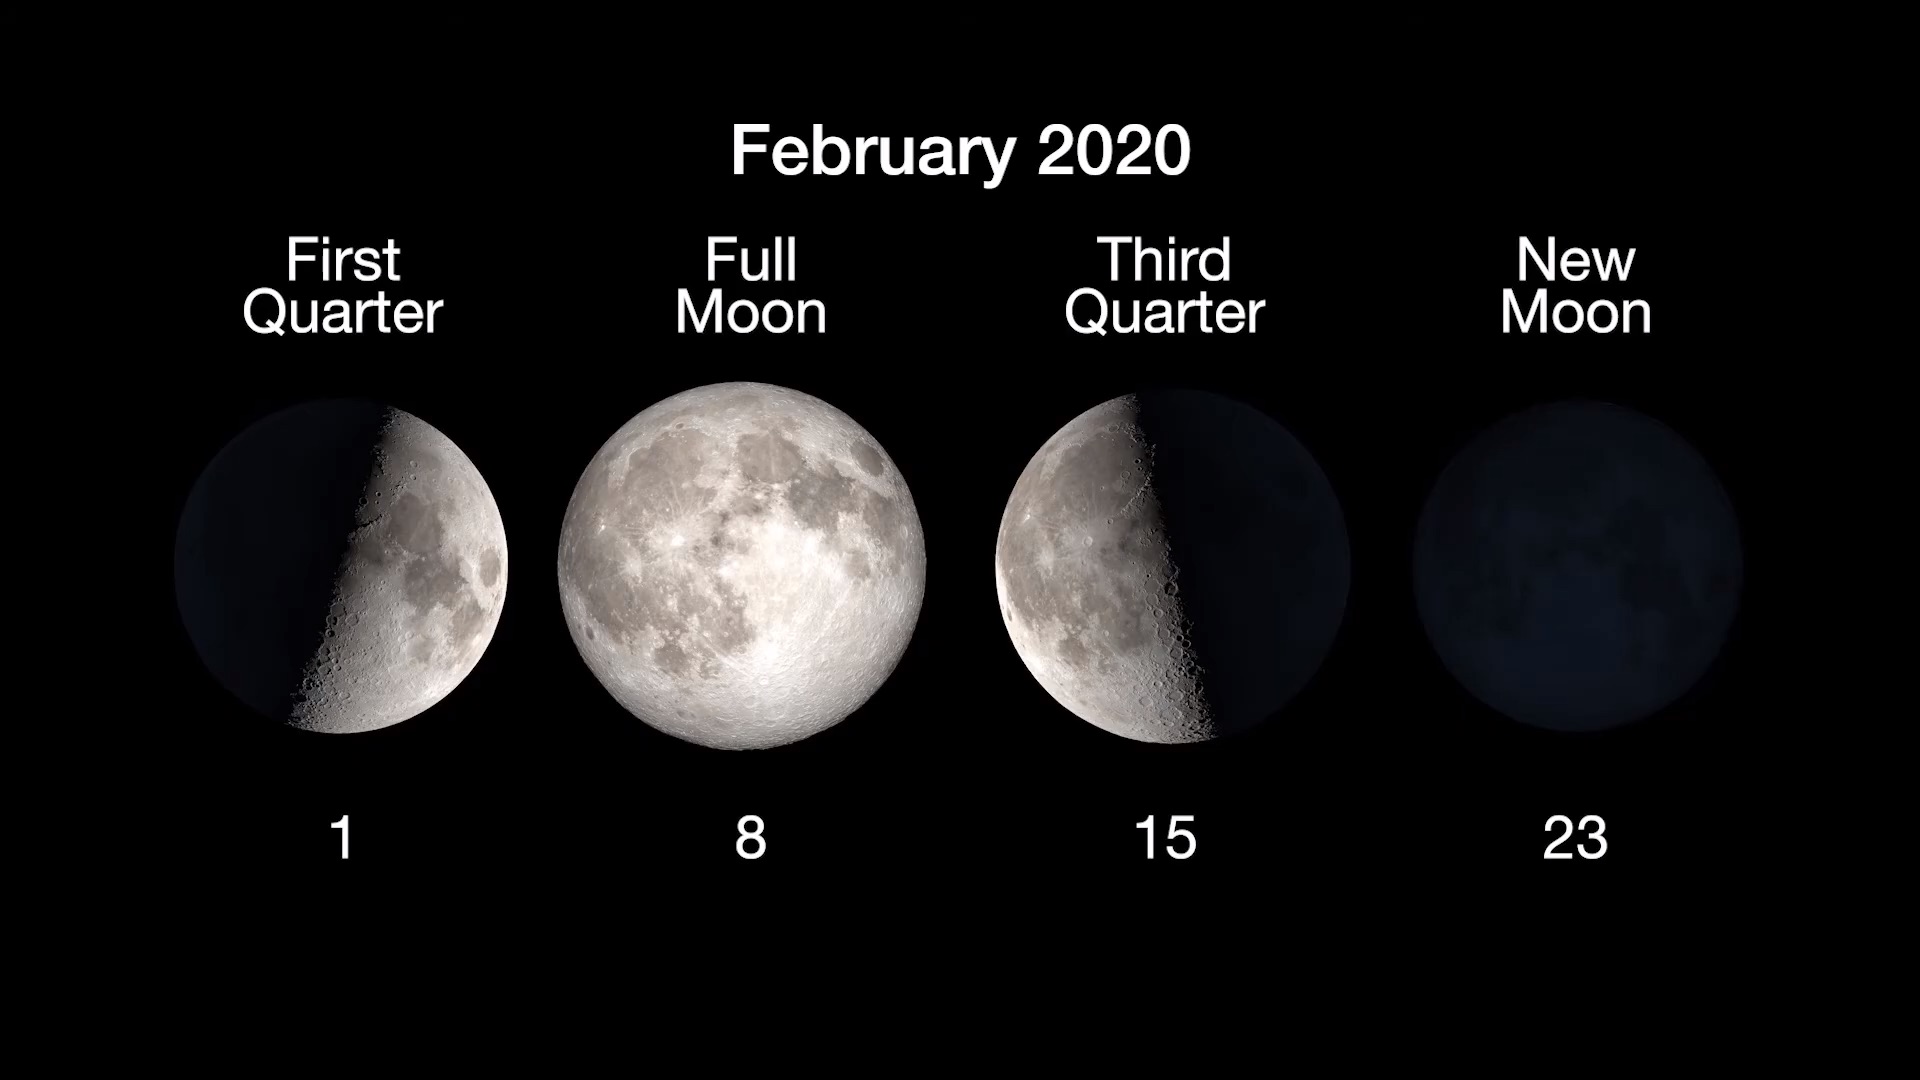 chart showing changing phases of the moon, full on Feb 8, new on Feb 23